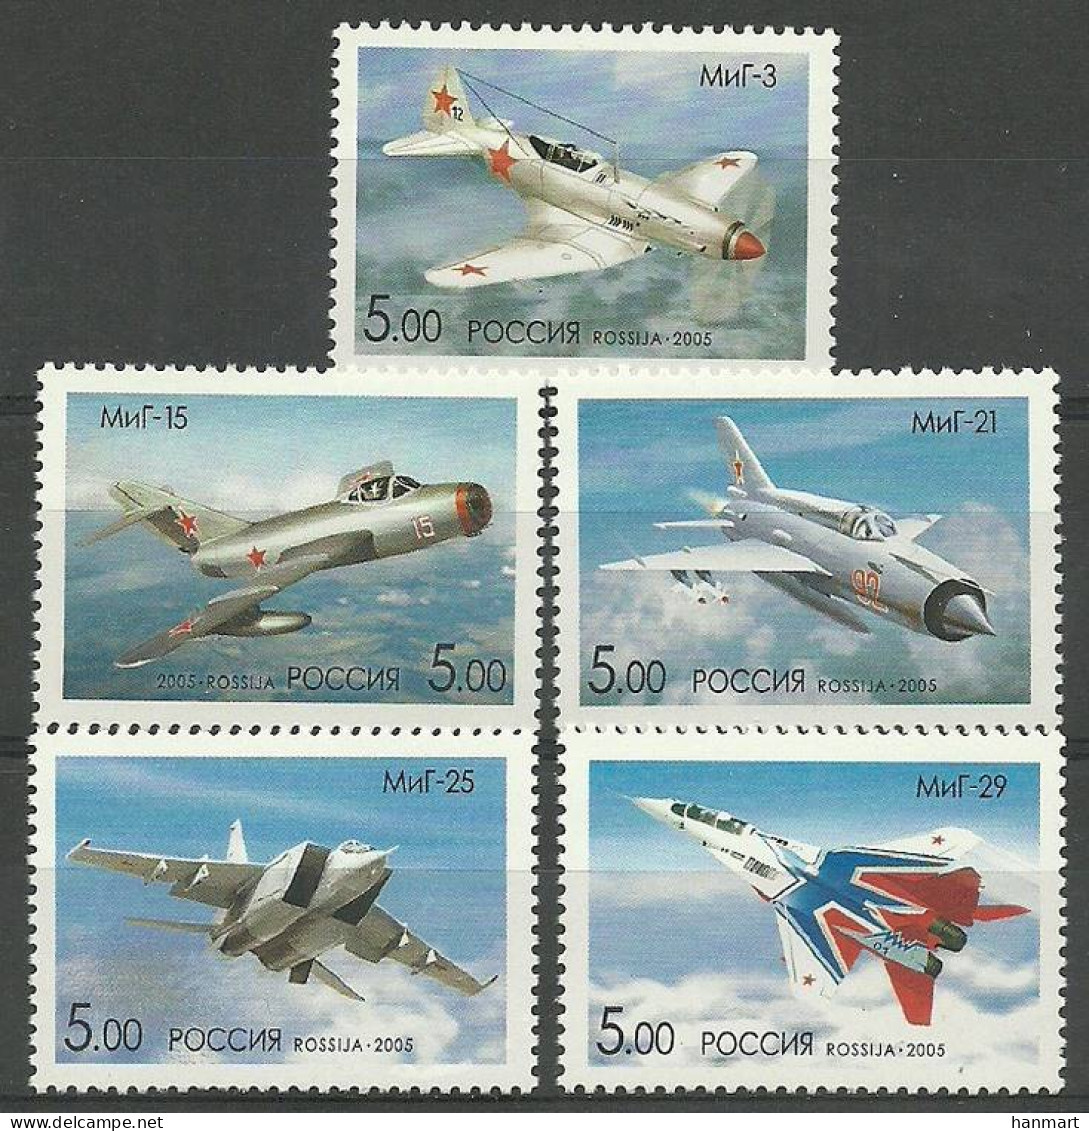 Russia 2005 Mi 1276-1280 MNH  (ZE4 RSS1276-1280) - Airplanes